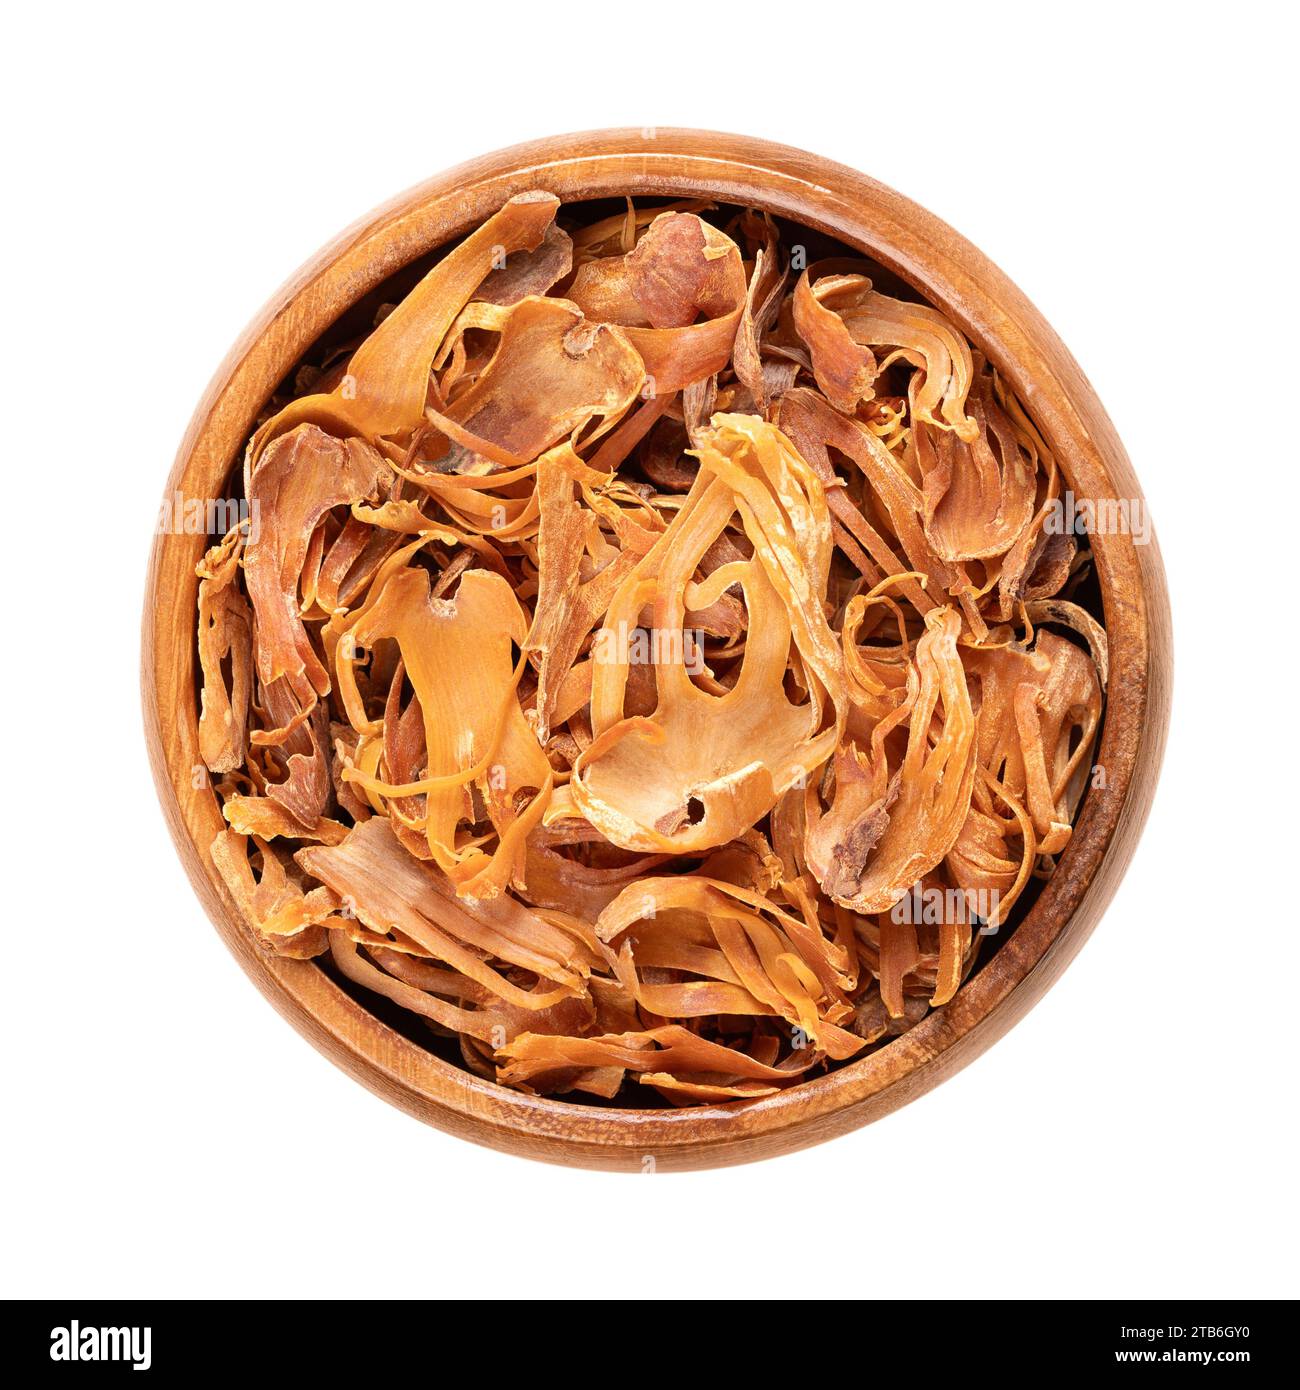 Dried mace in a wooden bowl. Spice with pale yellow and orange tan, made of seed coverings of nutmeg seeds, with similar flavor, but more delicate. Stock Photo